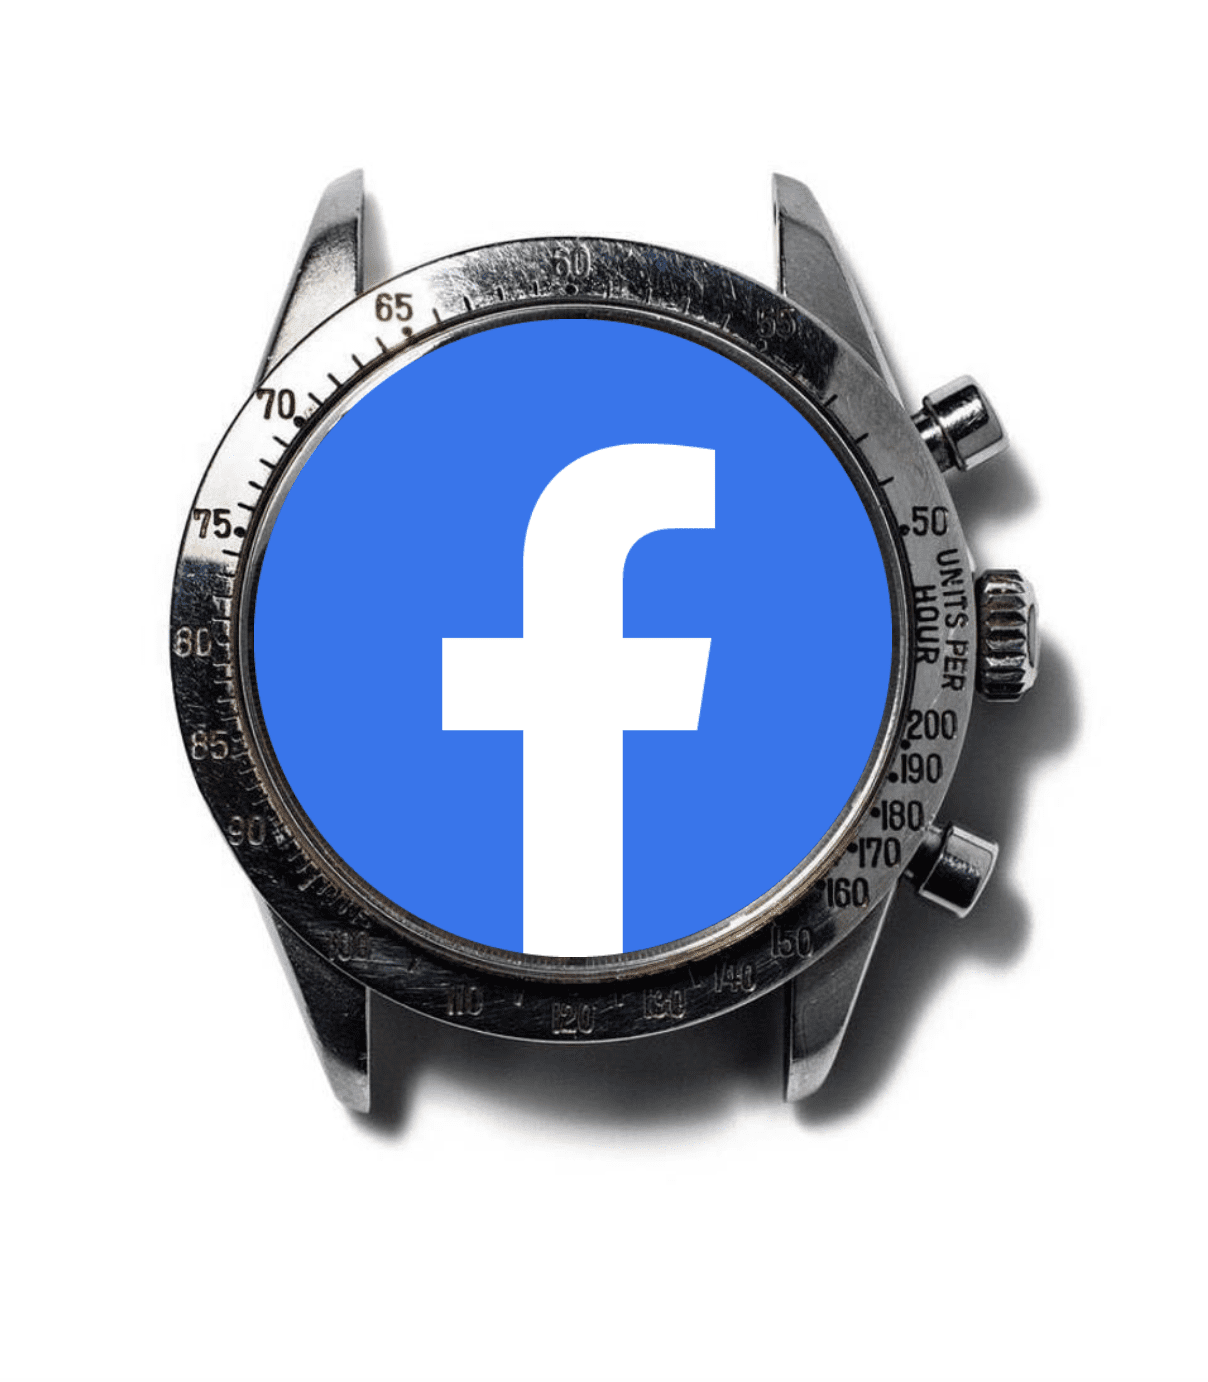 RECOMMENDED READING: Why the new Facebook watch could be a hard sell